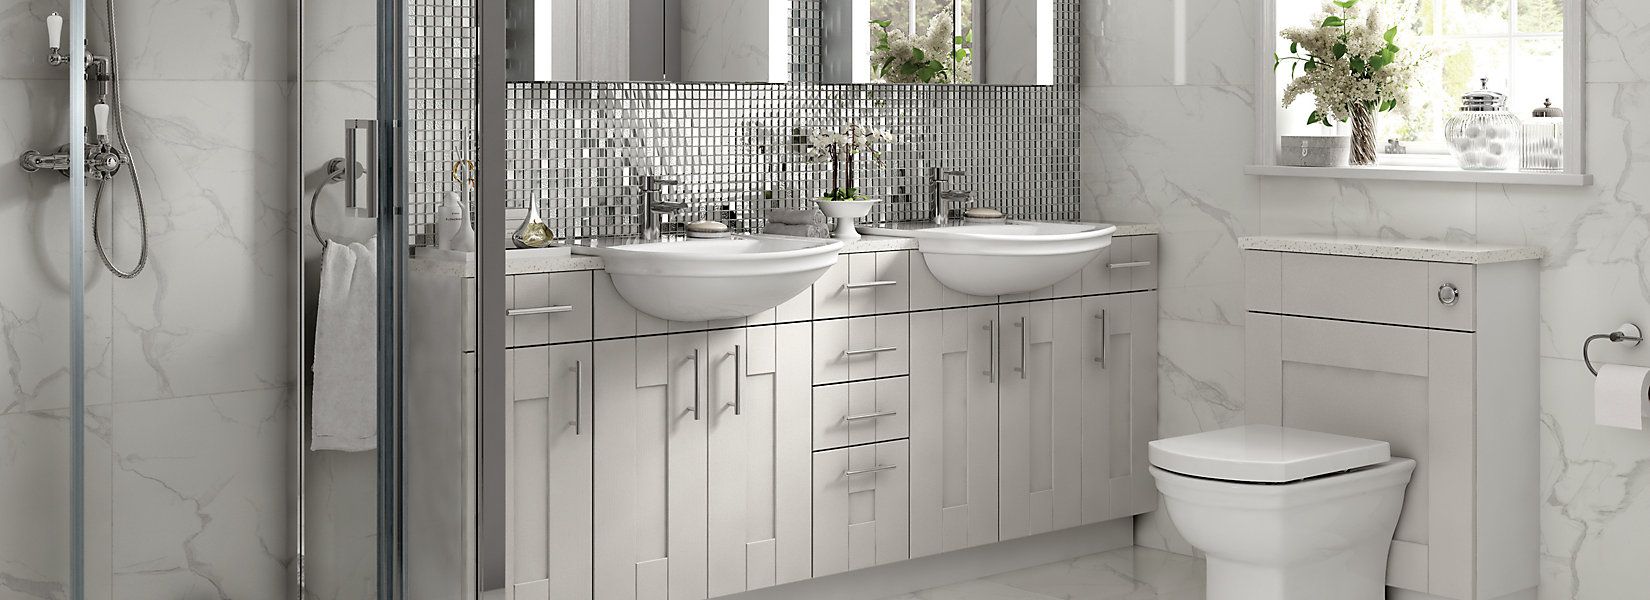 wickes bathroom fitted furniture Wickes fitted bathroom furniture fresh wickes kitchens mndw wickes